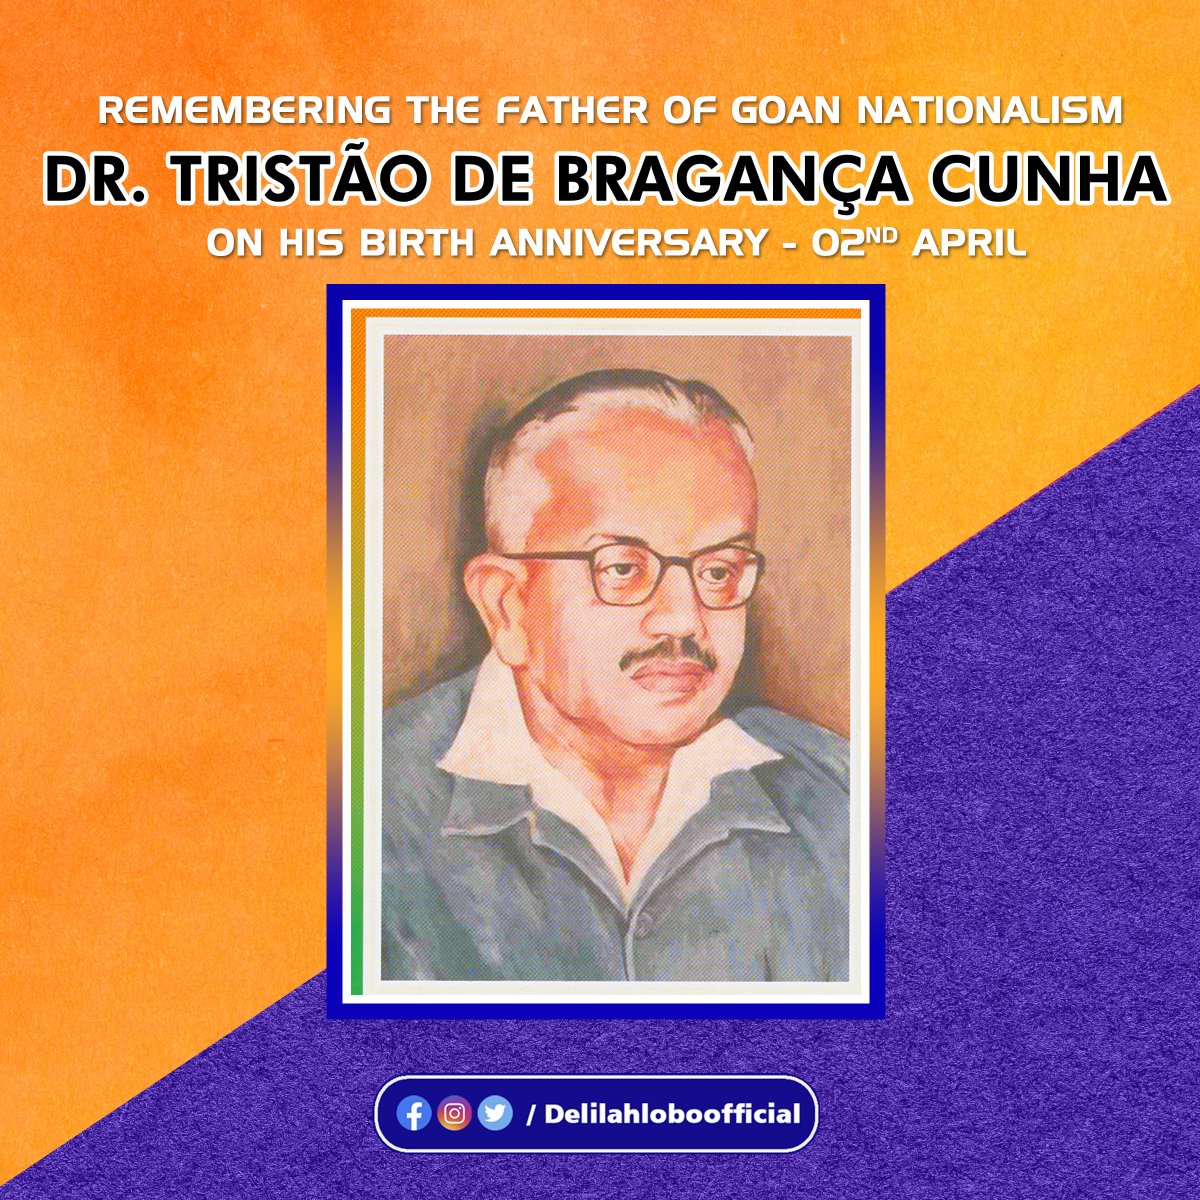 Honoring the legacy of Indian nationalist and anti-colonial hero, Dr. #TBCunha, on his birth anniversary! 🇮🇳 Known as the 'Father of Goan Nationalism,' his tireless efforts paved the way for Goa's liberation. Let's commemorate his unwavering dedication to freedom and justice.